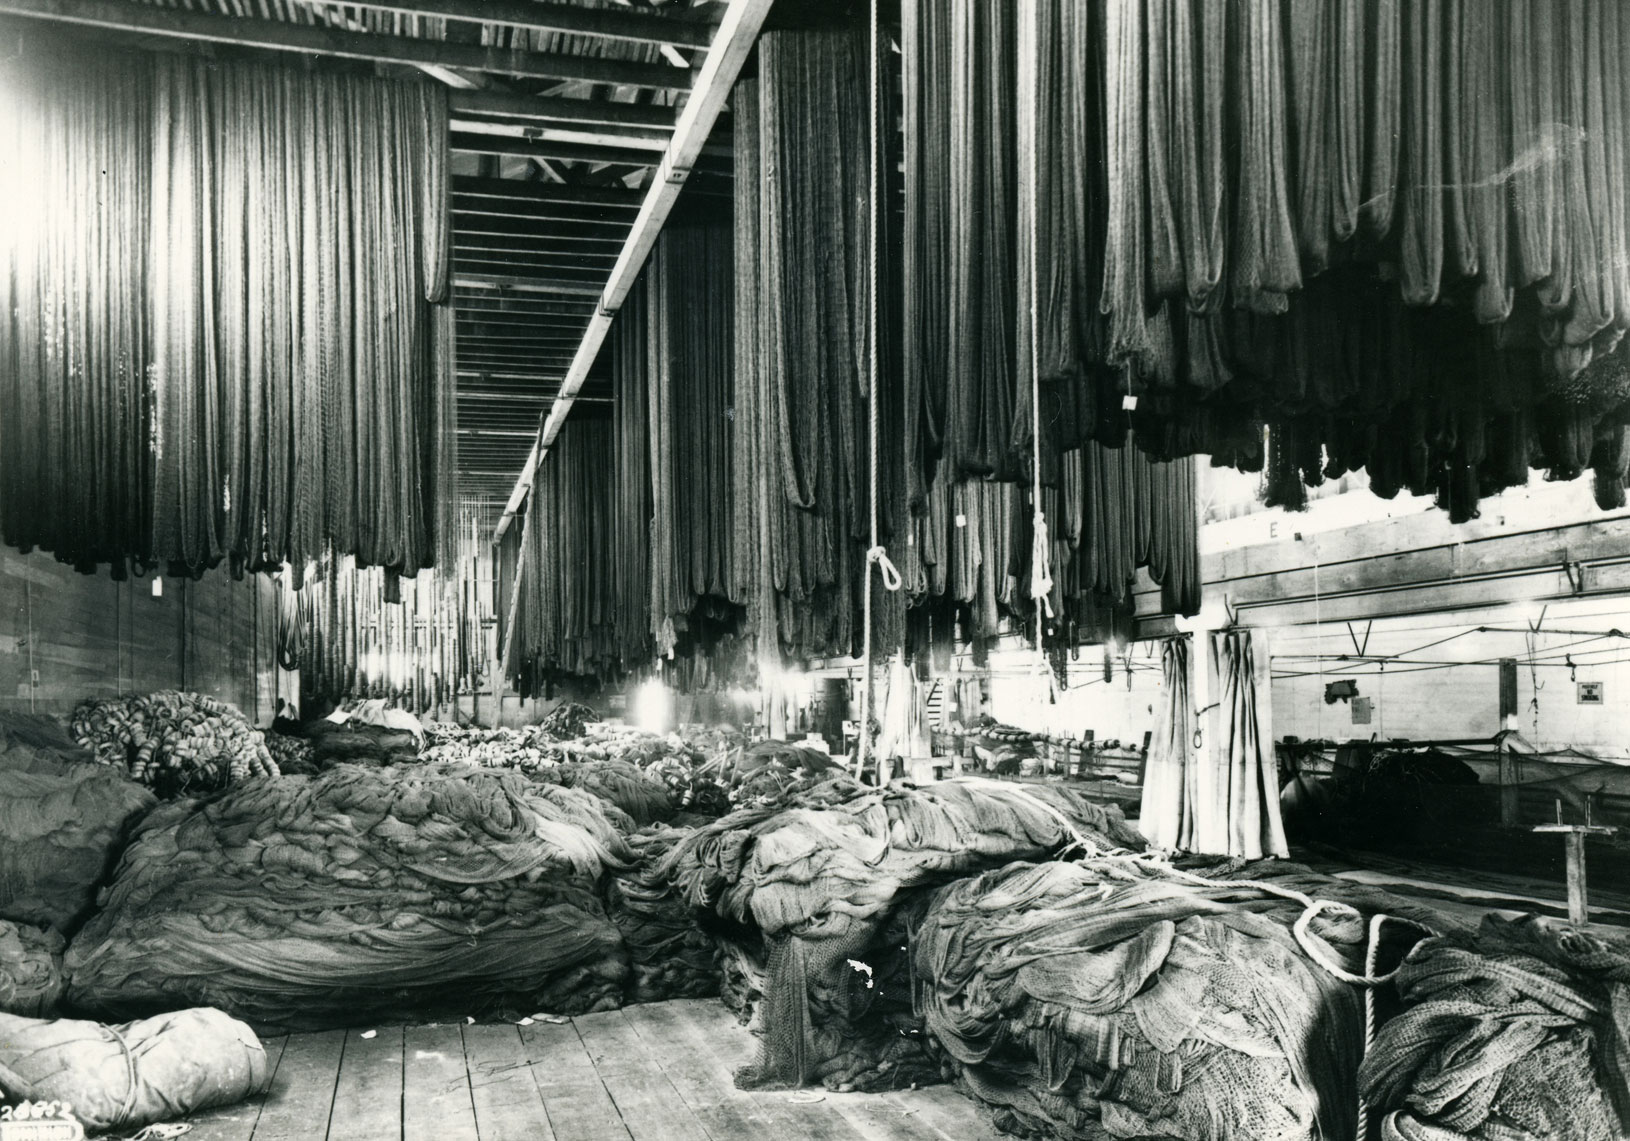 A large open room is filled with nets both hanging and piled on the floor.